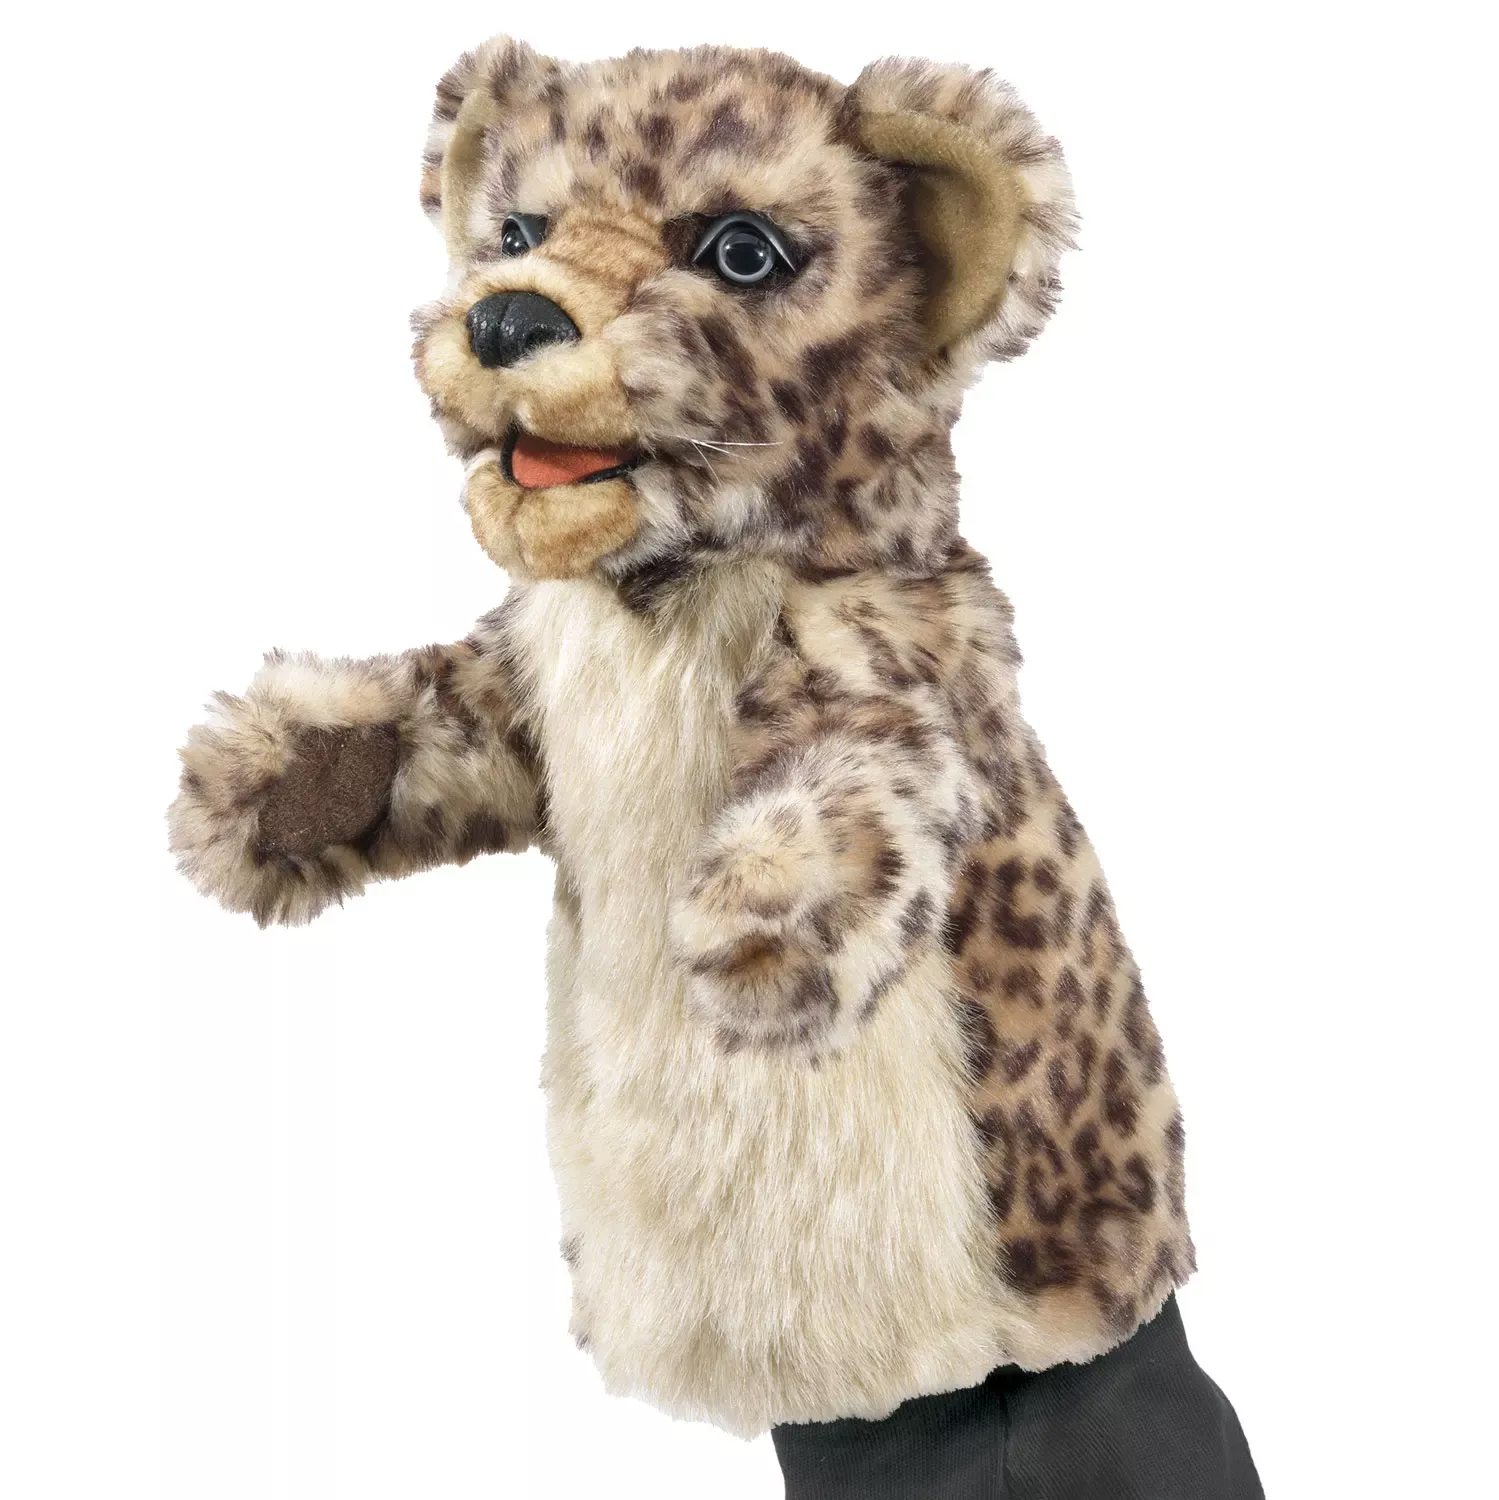 Folkmanis hand puppet leopard cub (stage puppet)